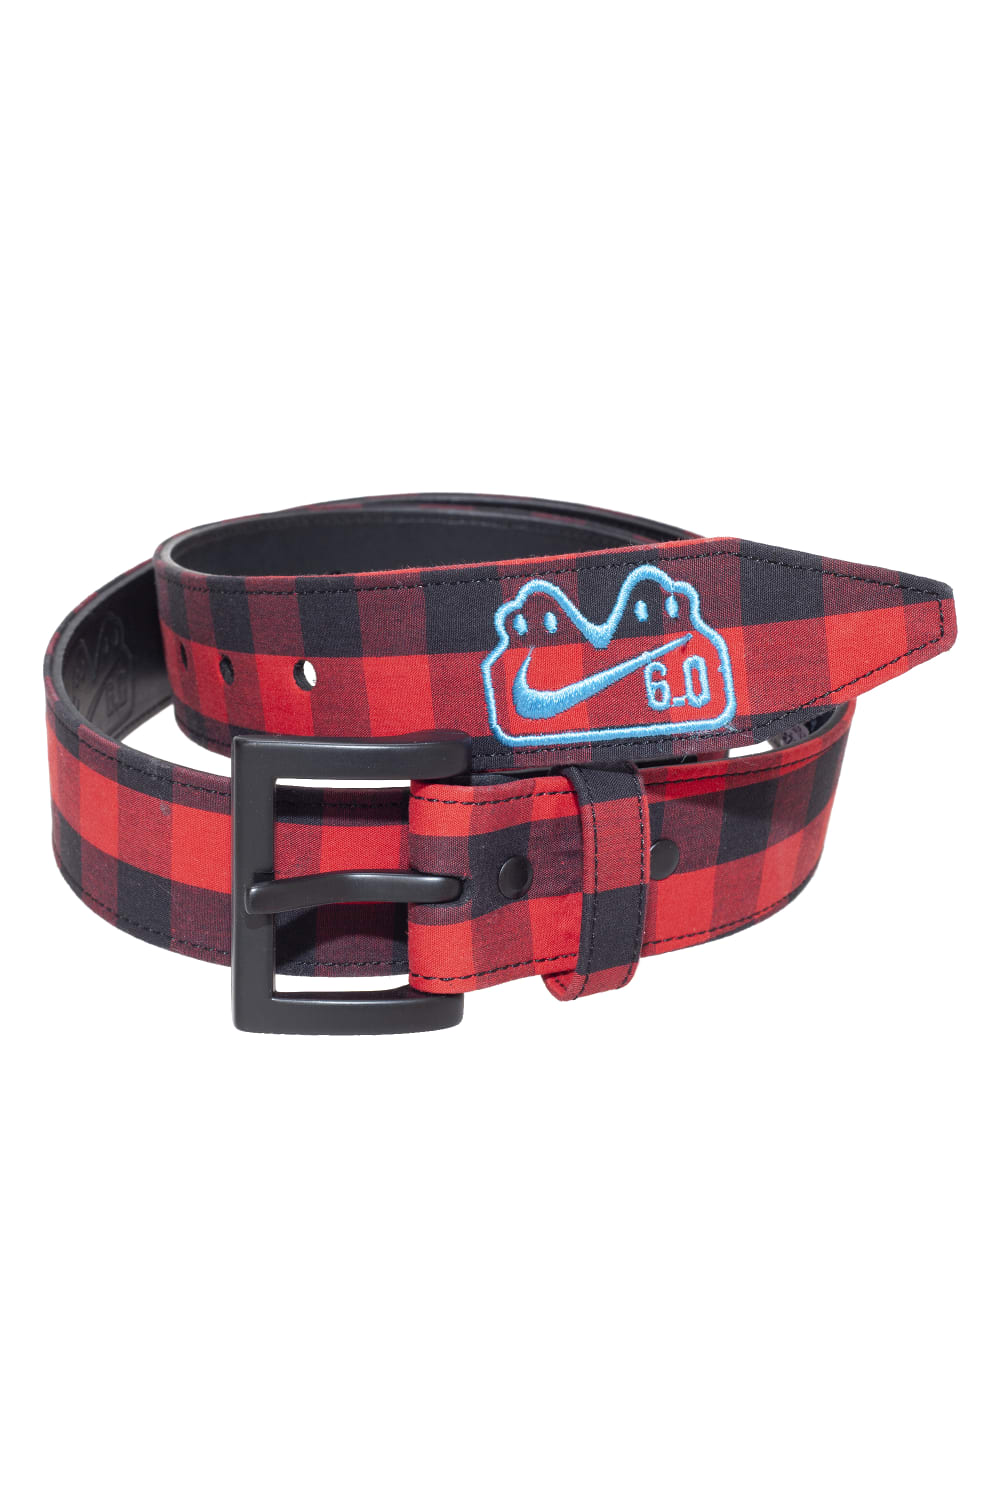 Mens 6.0 Saloon Check Belt - Red